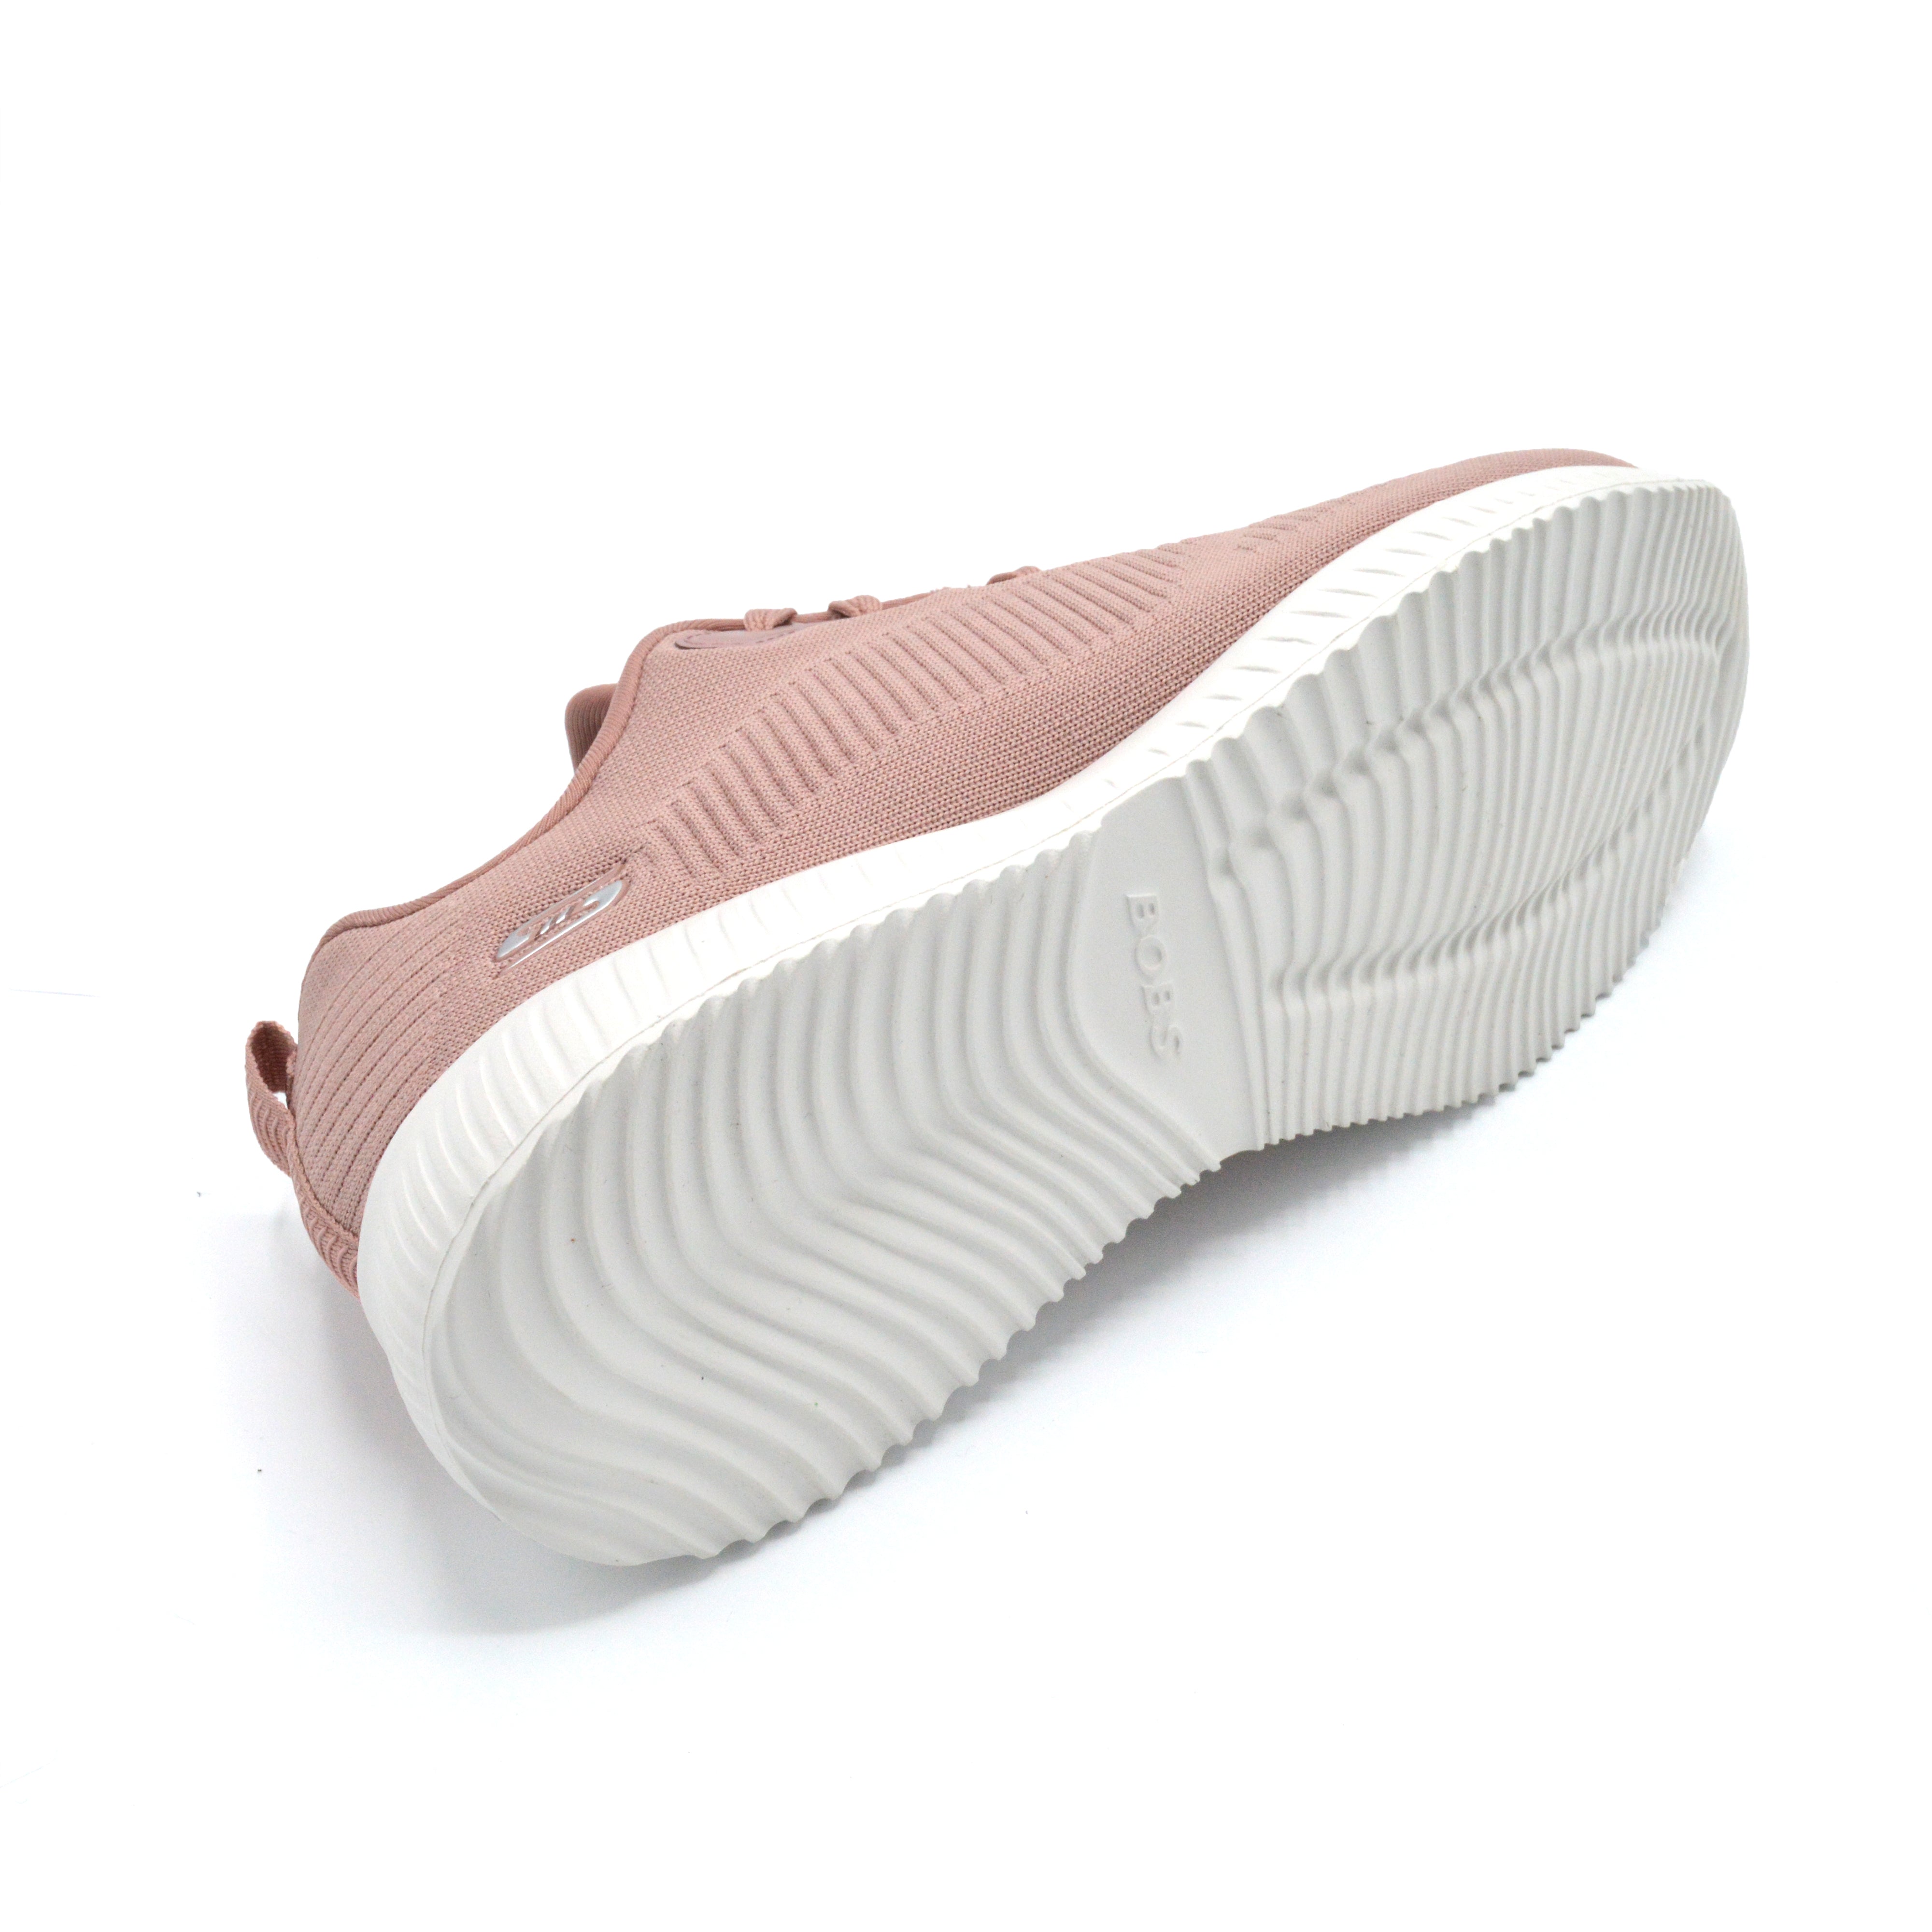 Skechers Tough Talk - Ladies Wide Fit Trainer -  2E Fitting - Blush Pink